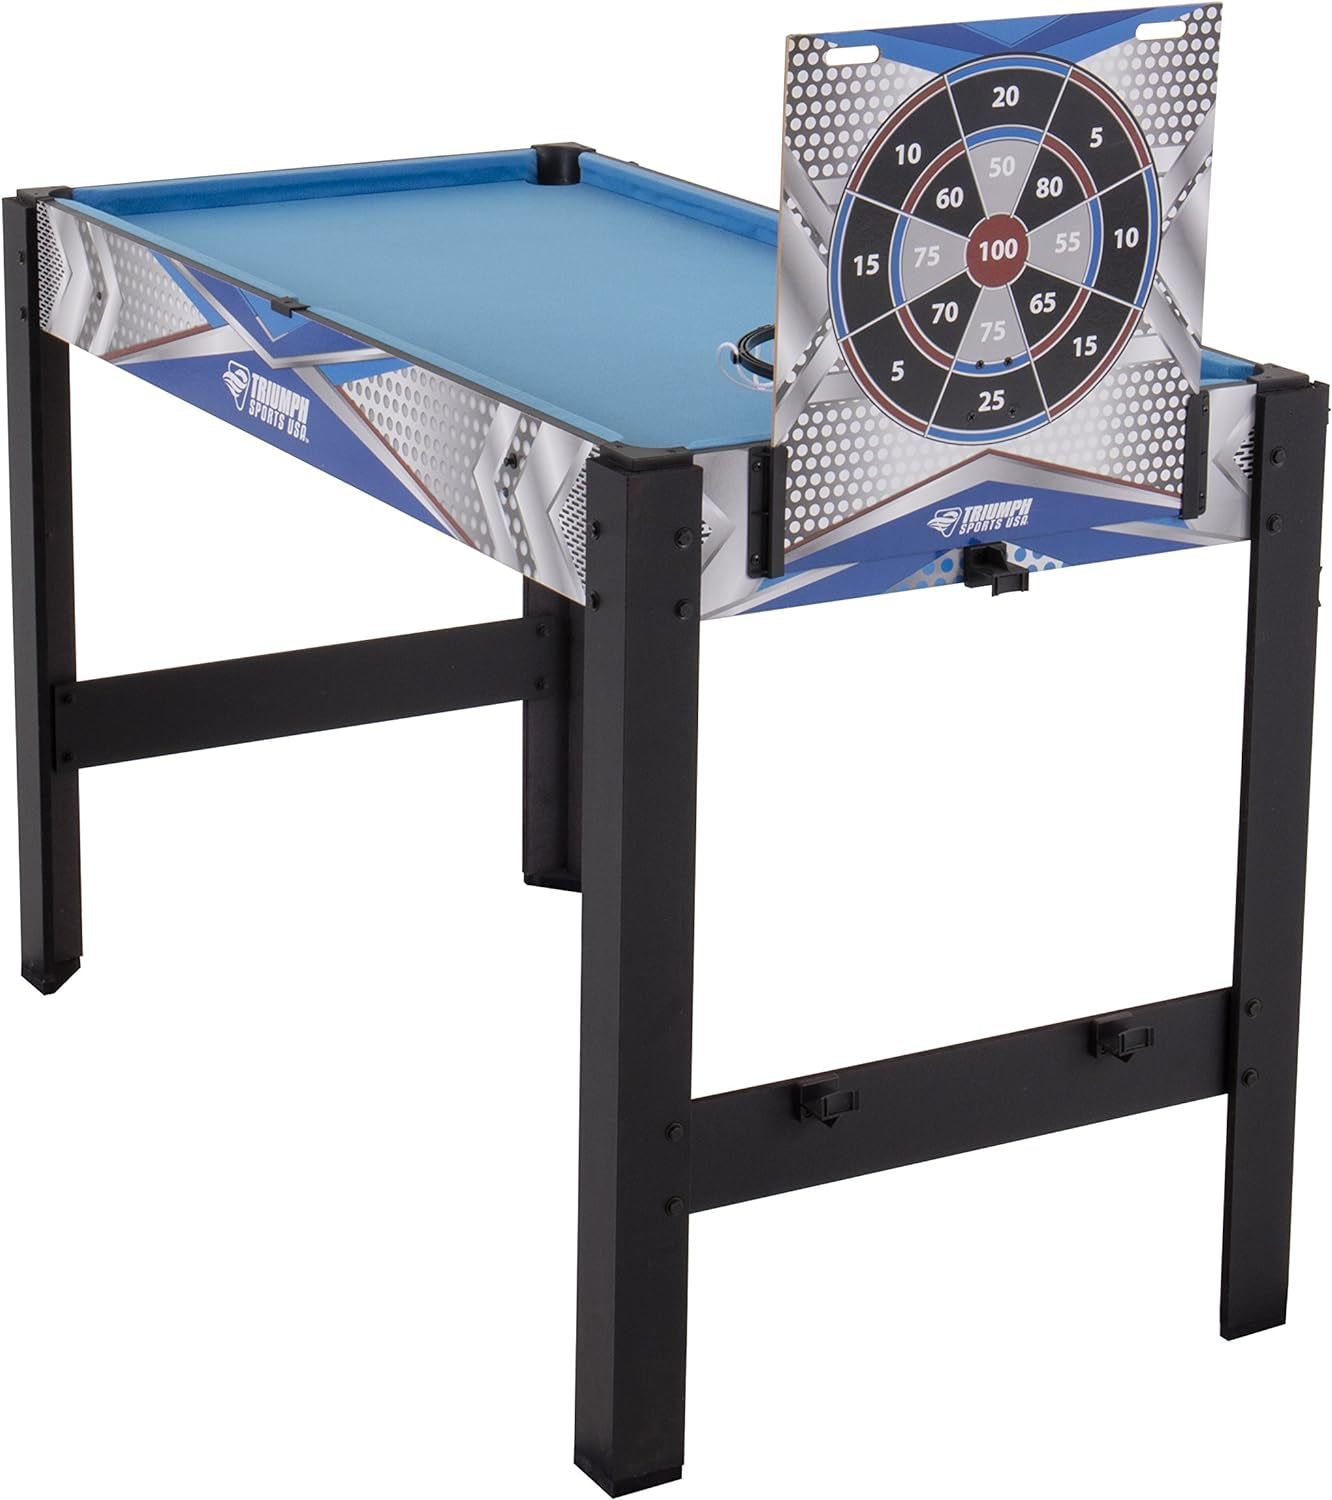 Triumph 13-In-1 Combo Game Table Includes Basketball, Table Tennis, Billiards, Push Hockey, Launch Football, Baseball, Tic-Tac-Toe, and Skee Bean Bag Toss